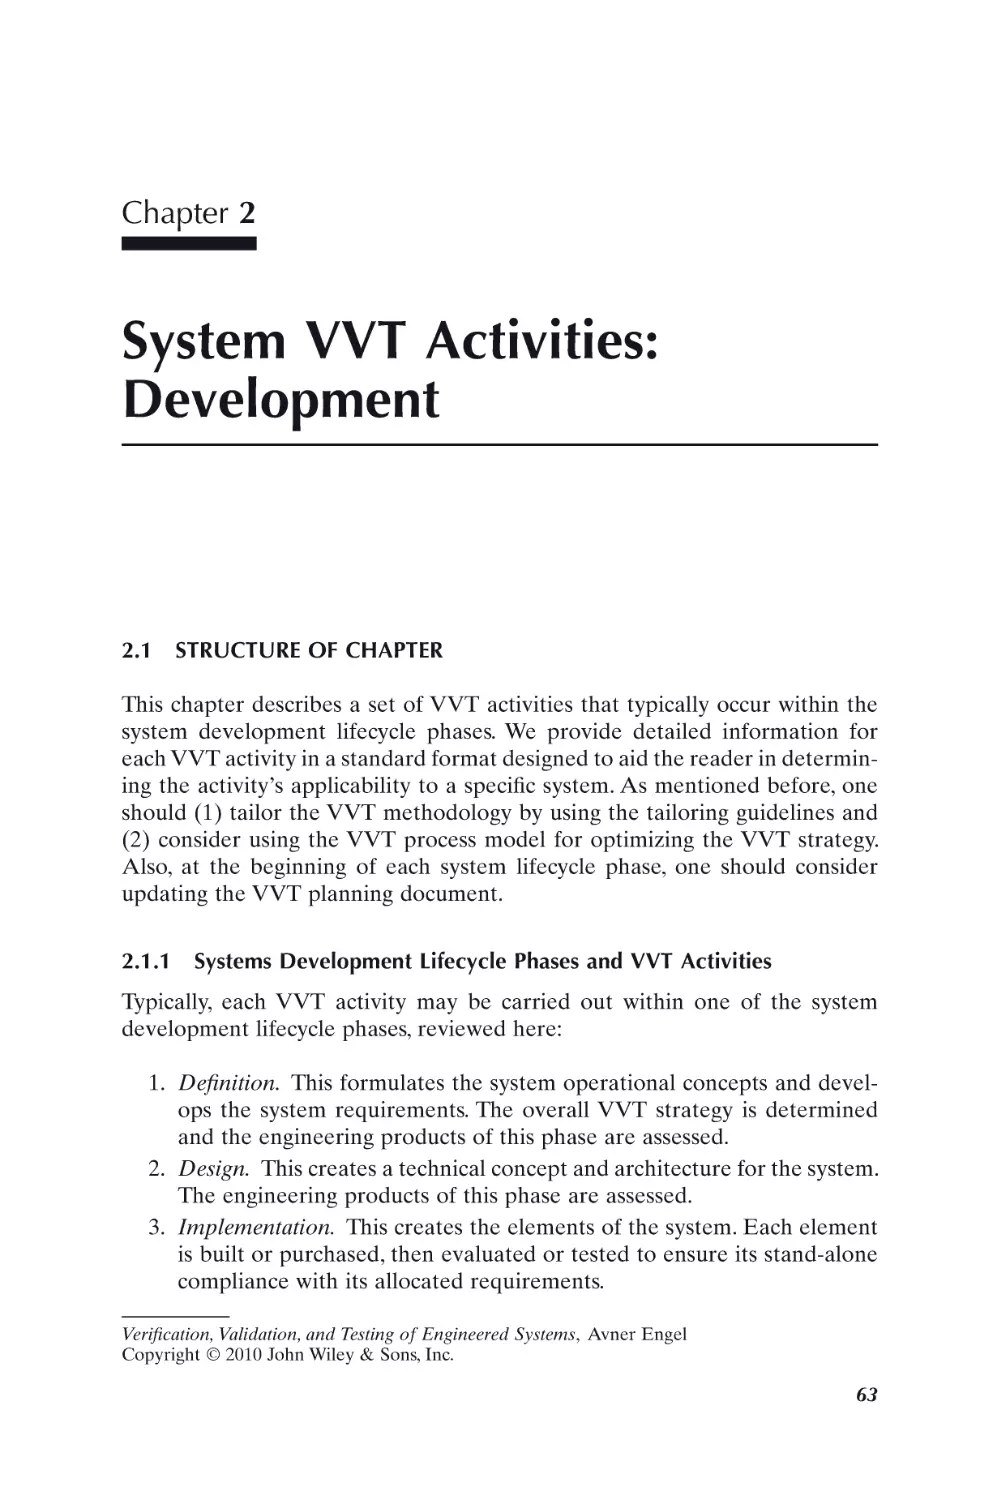 Chapter 2
2.1 STRUCTURE OF CHAPTER
2.1.1 Systems Development Lifecycle Phases and VVT Activities